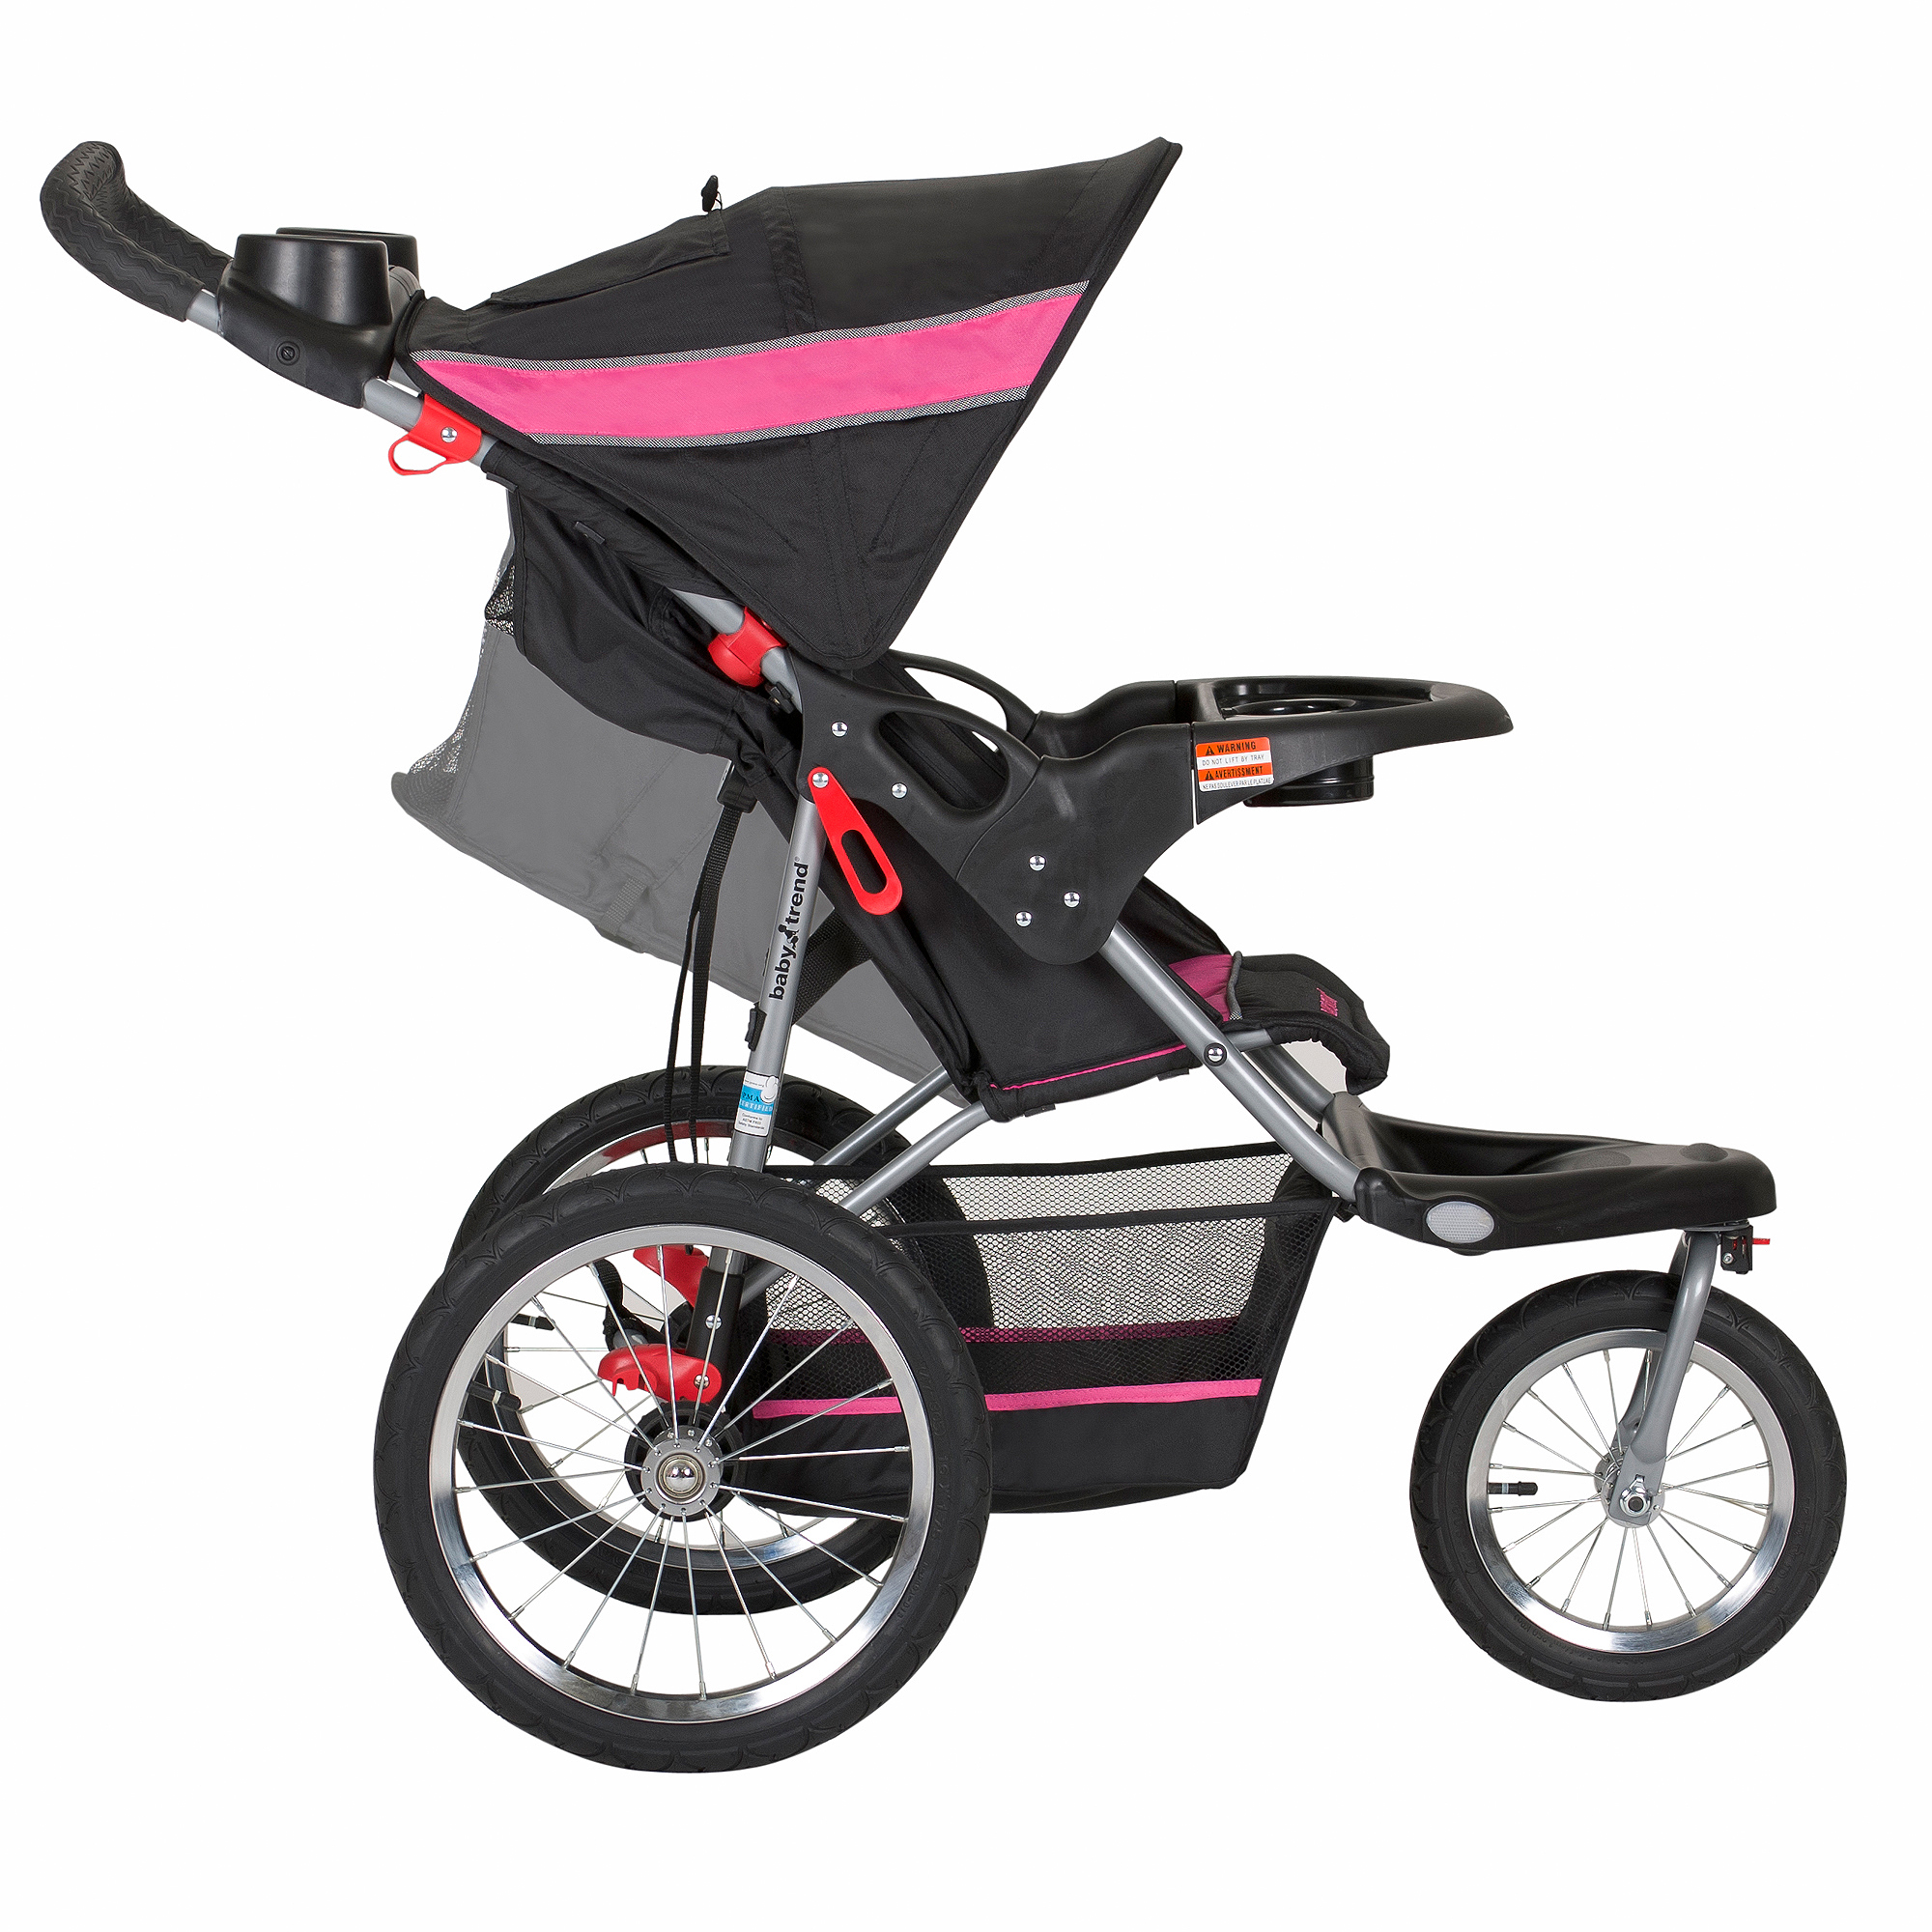 Baby Trend Expedition Travel System Stroller, Pink - image 4 of 6